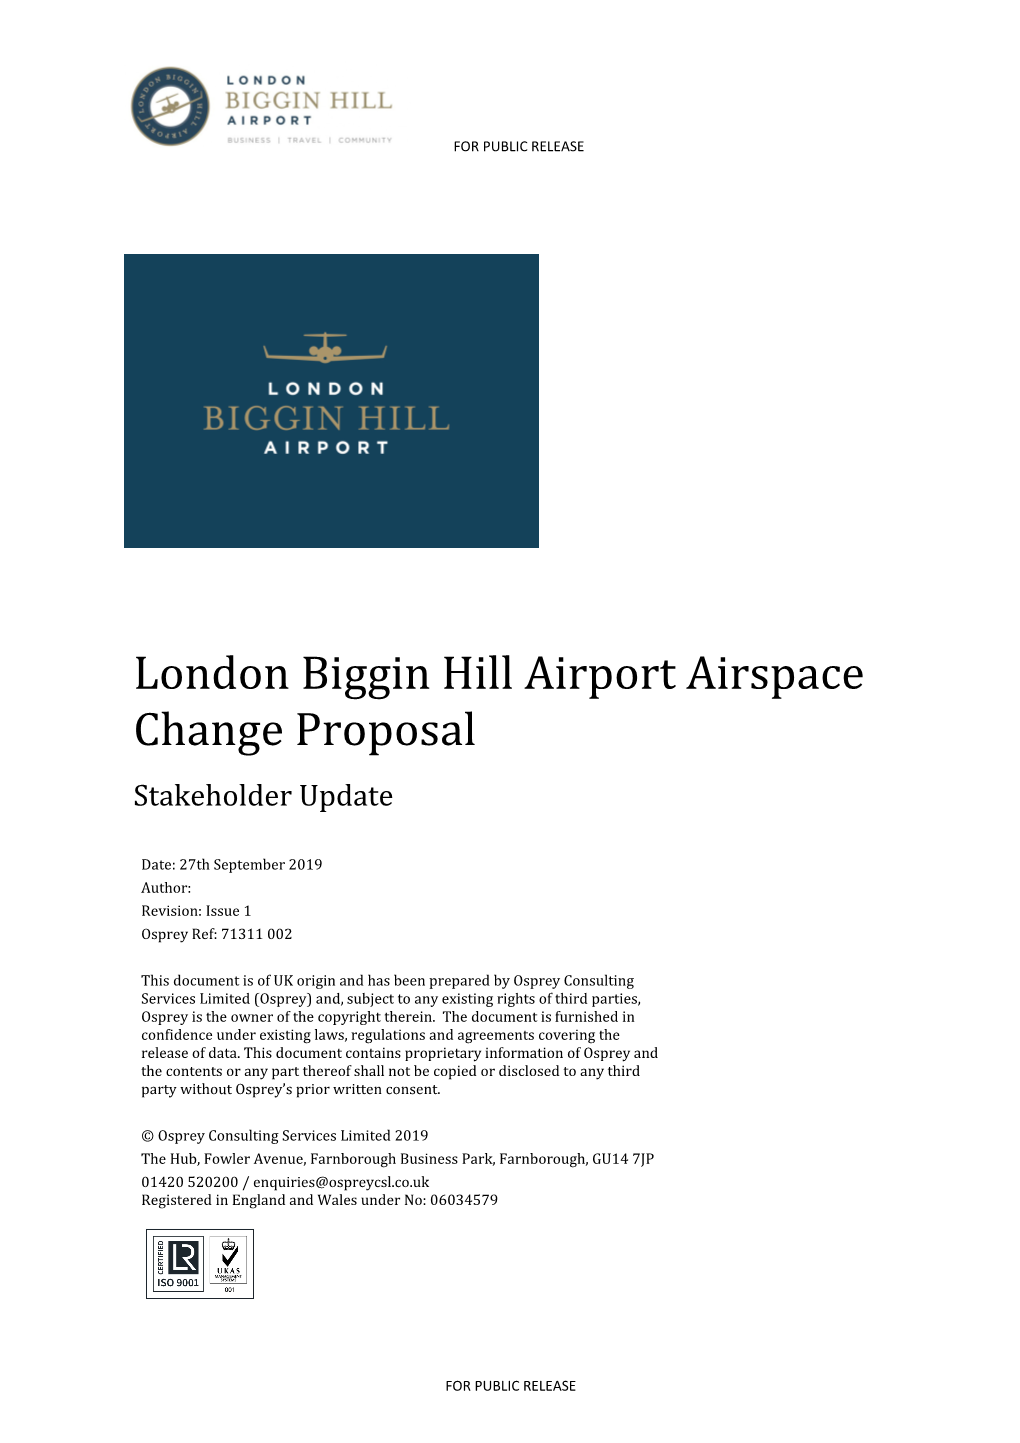 London Biggin Hill Airport Airspace Change Proposal Stakeholder Update